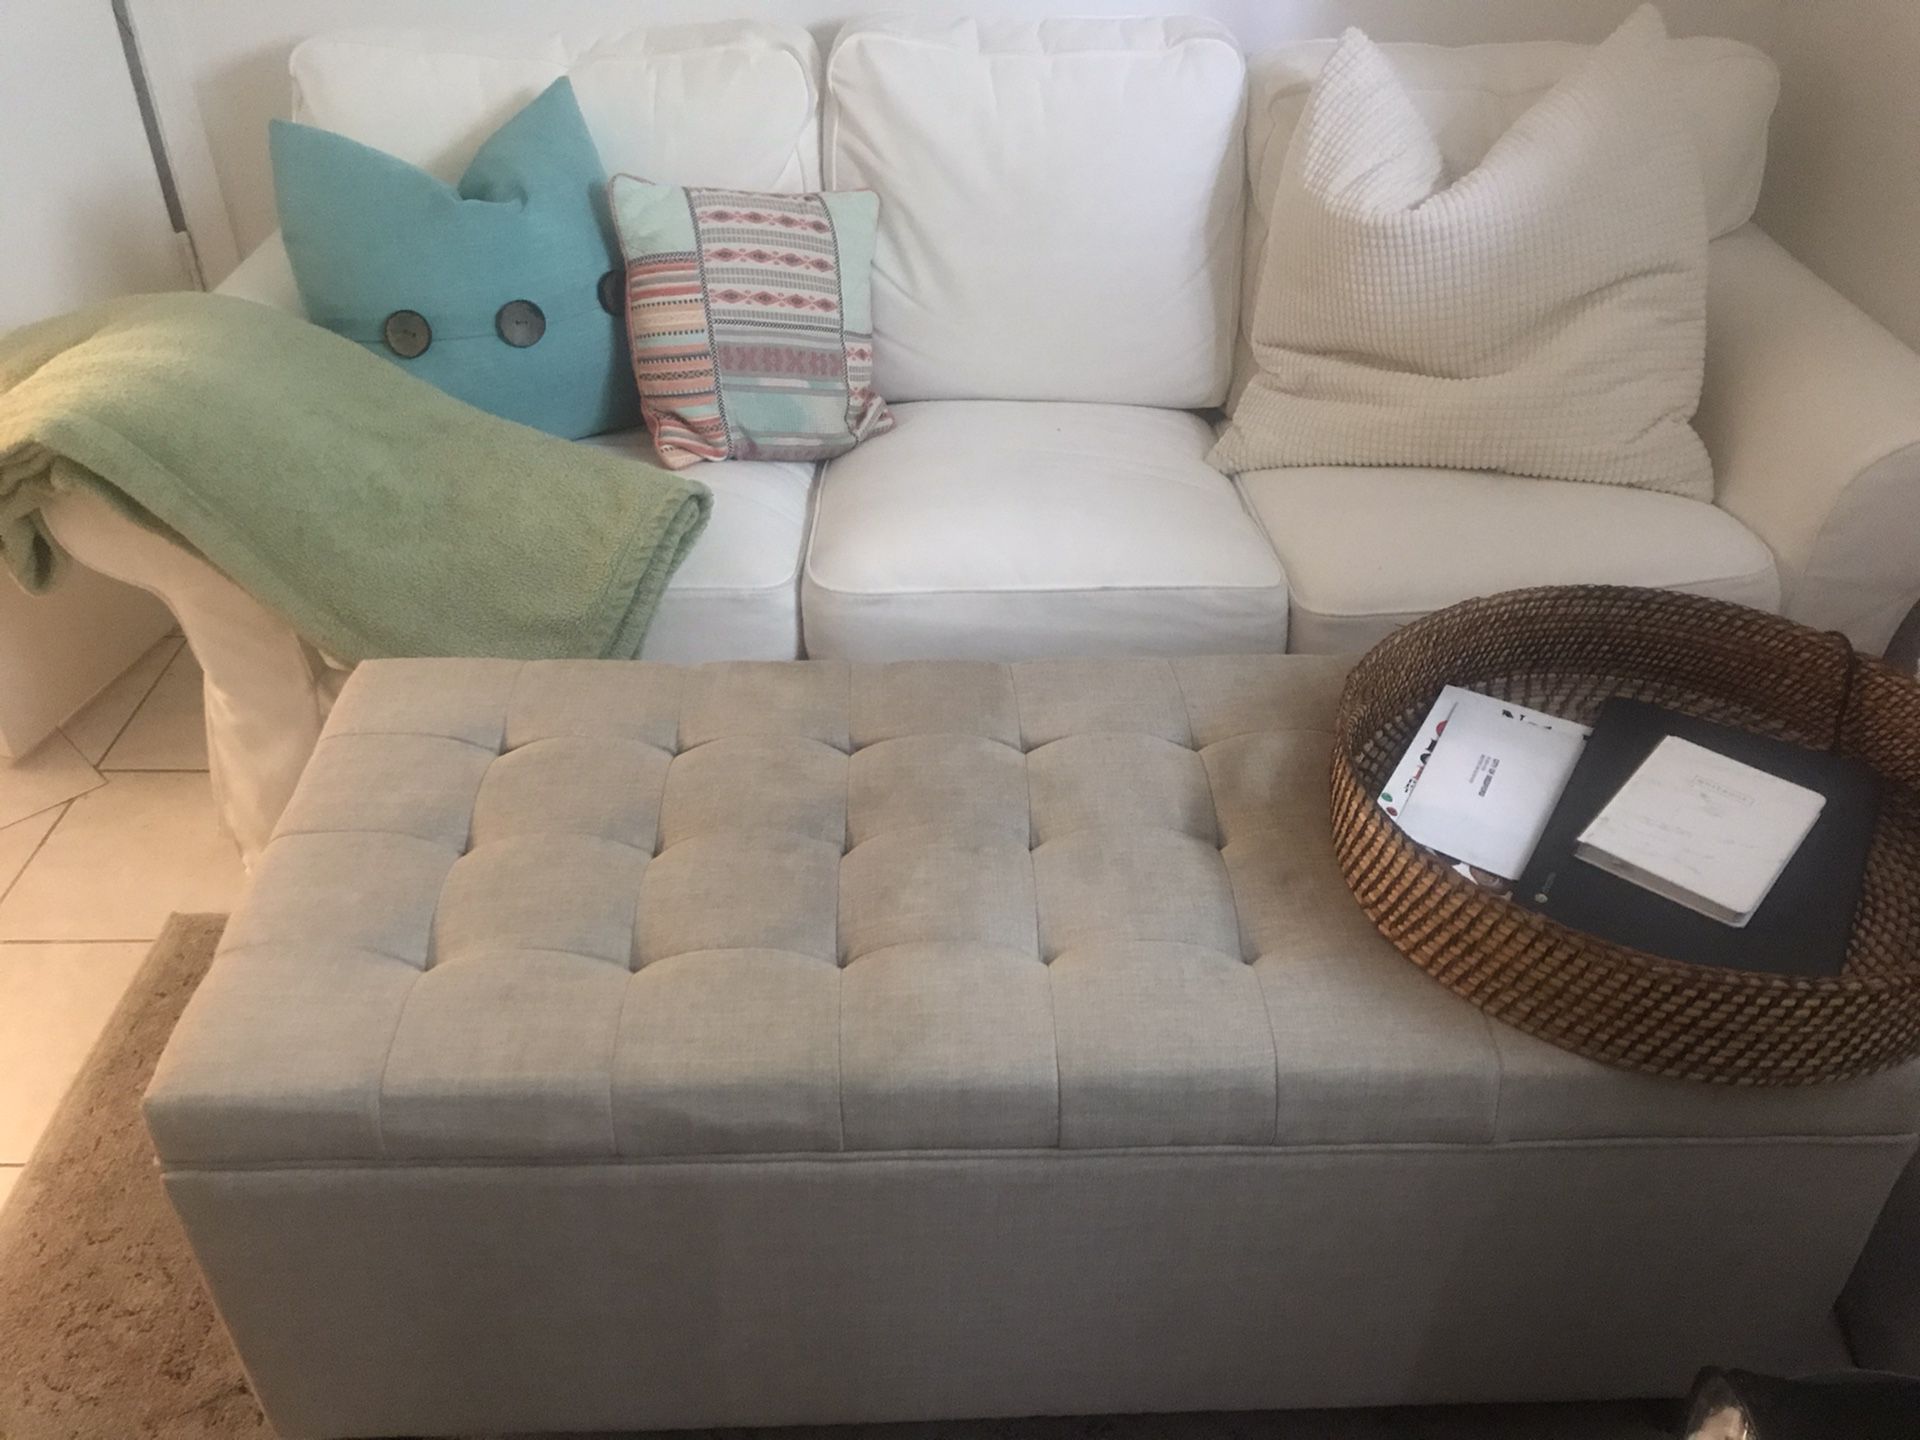 White couch, ottoman, beach wood console, black and white bookcases, 50” TV, 19” brand new TV, brand new AirPods, IPad and much more!! Must sell ever